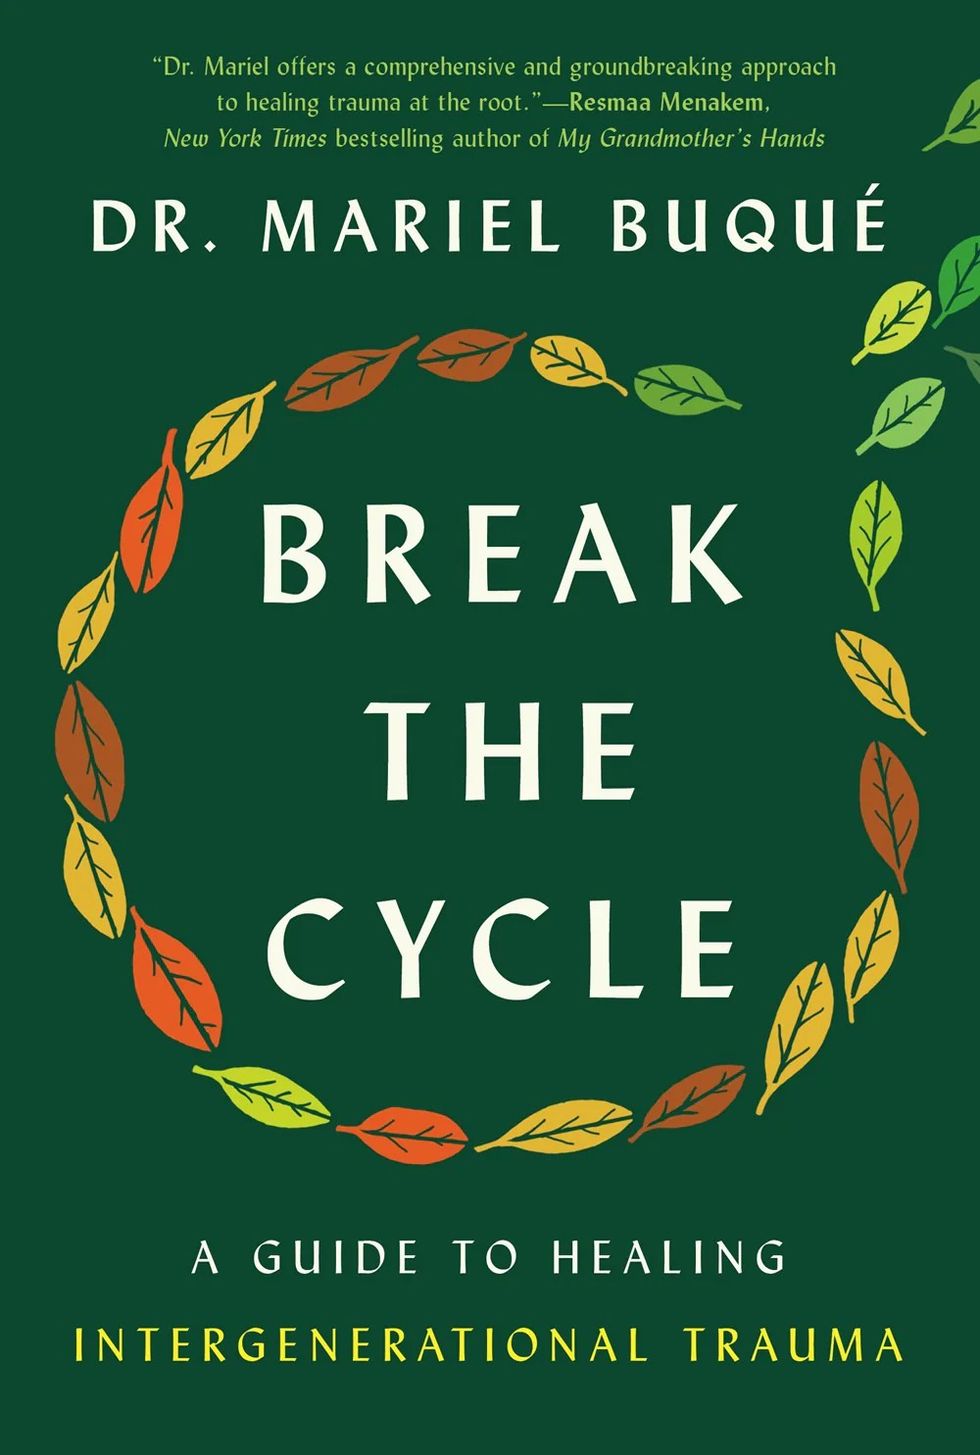 book-cover-for-Break-the-Cycle-A-Guide-to-Healing-Intergenerational-Trauma-by-Dr-Mariel-Buque